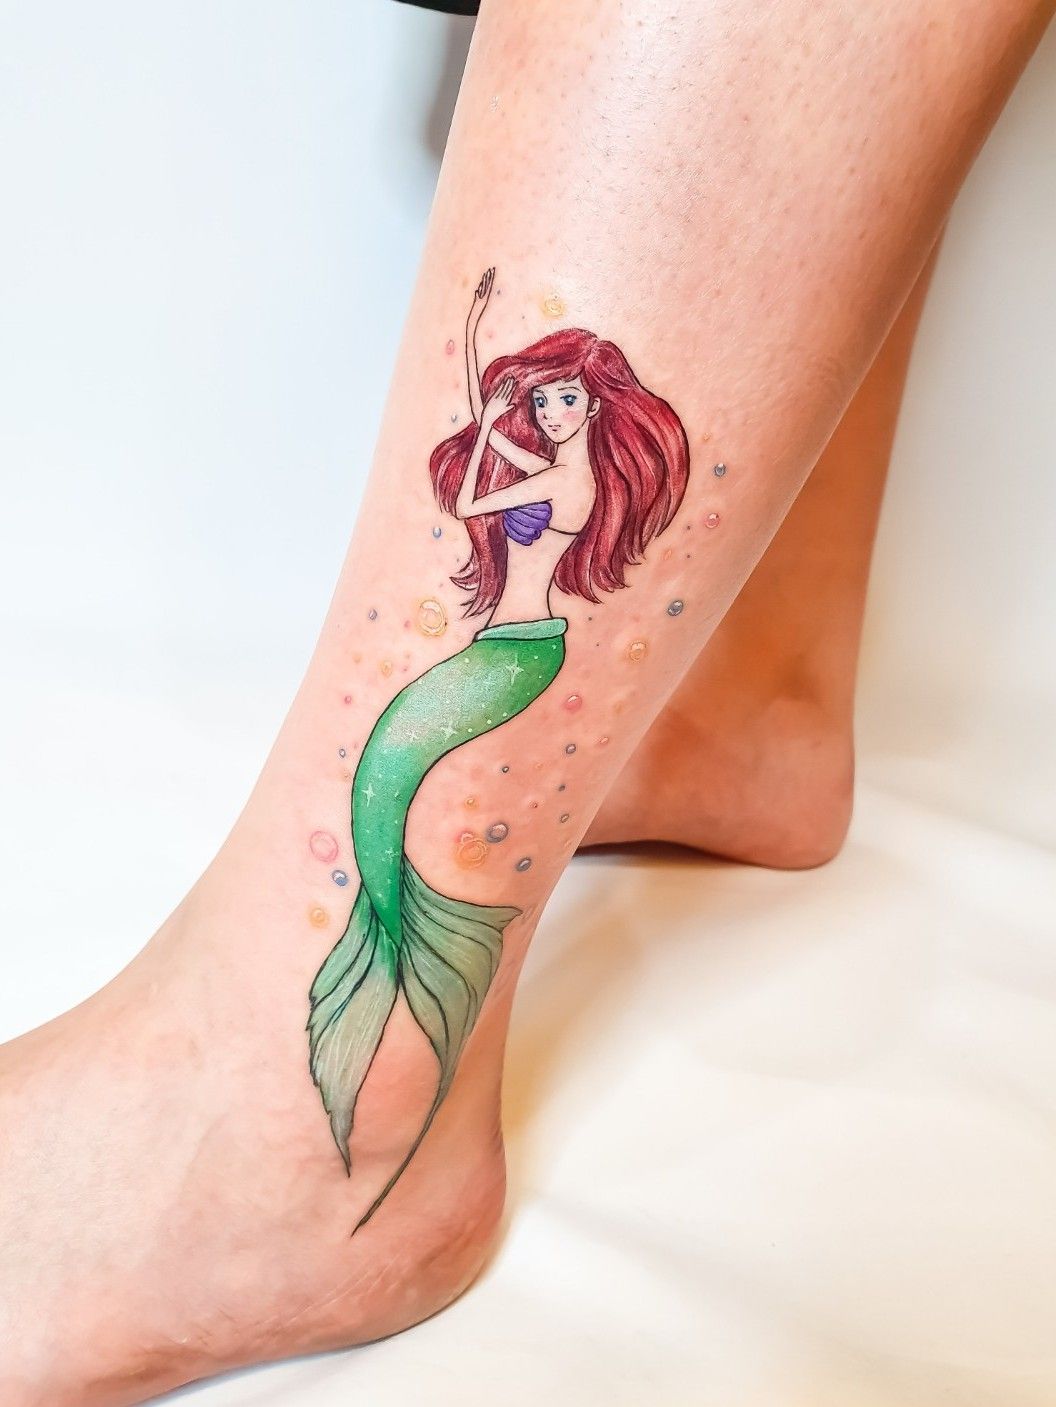 61 The Little Mermaid Tattoos Find Your Voice and Show Your Love for Ariel   Psycho Tats